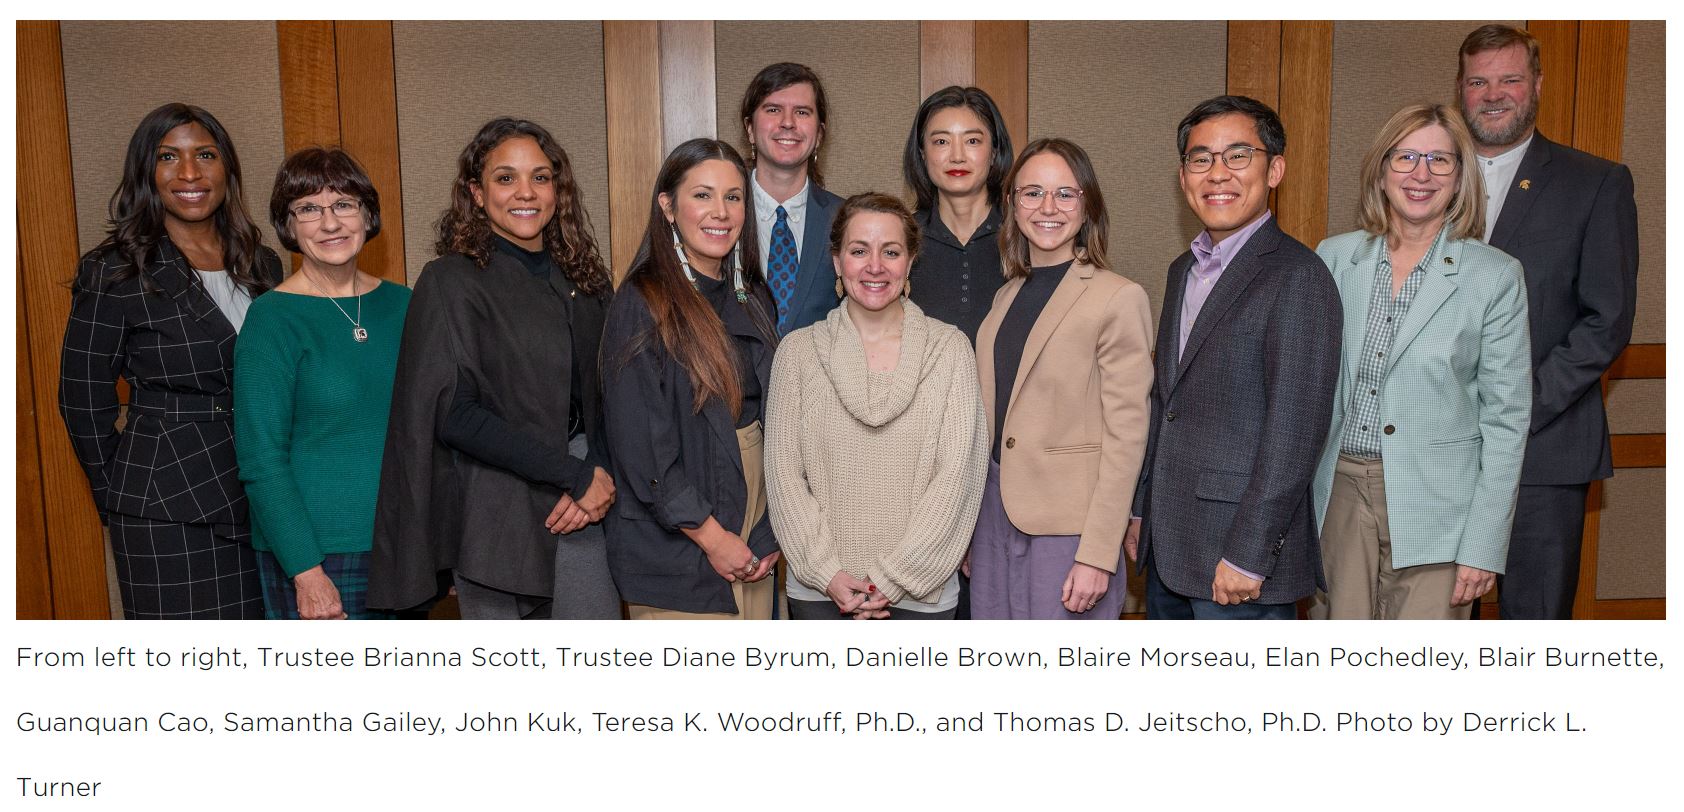 The first cohort of 1855 Professorship stand with Trustee Brianna Scott, Trustee Diane Byrum, Teresa K. Woodruff, PhD, and Thomas D. Jeitscho, Phd.